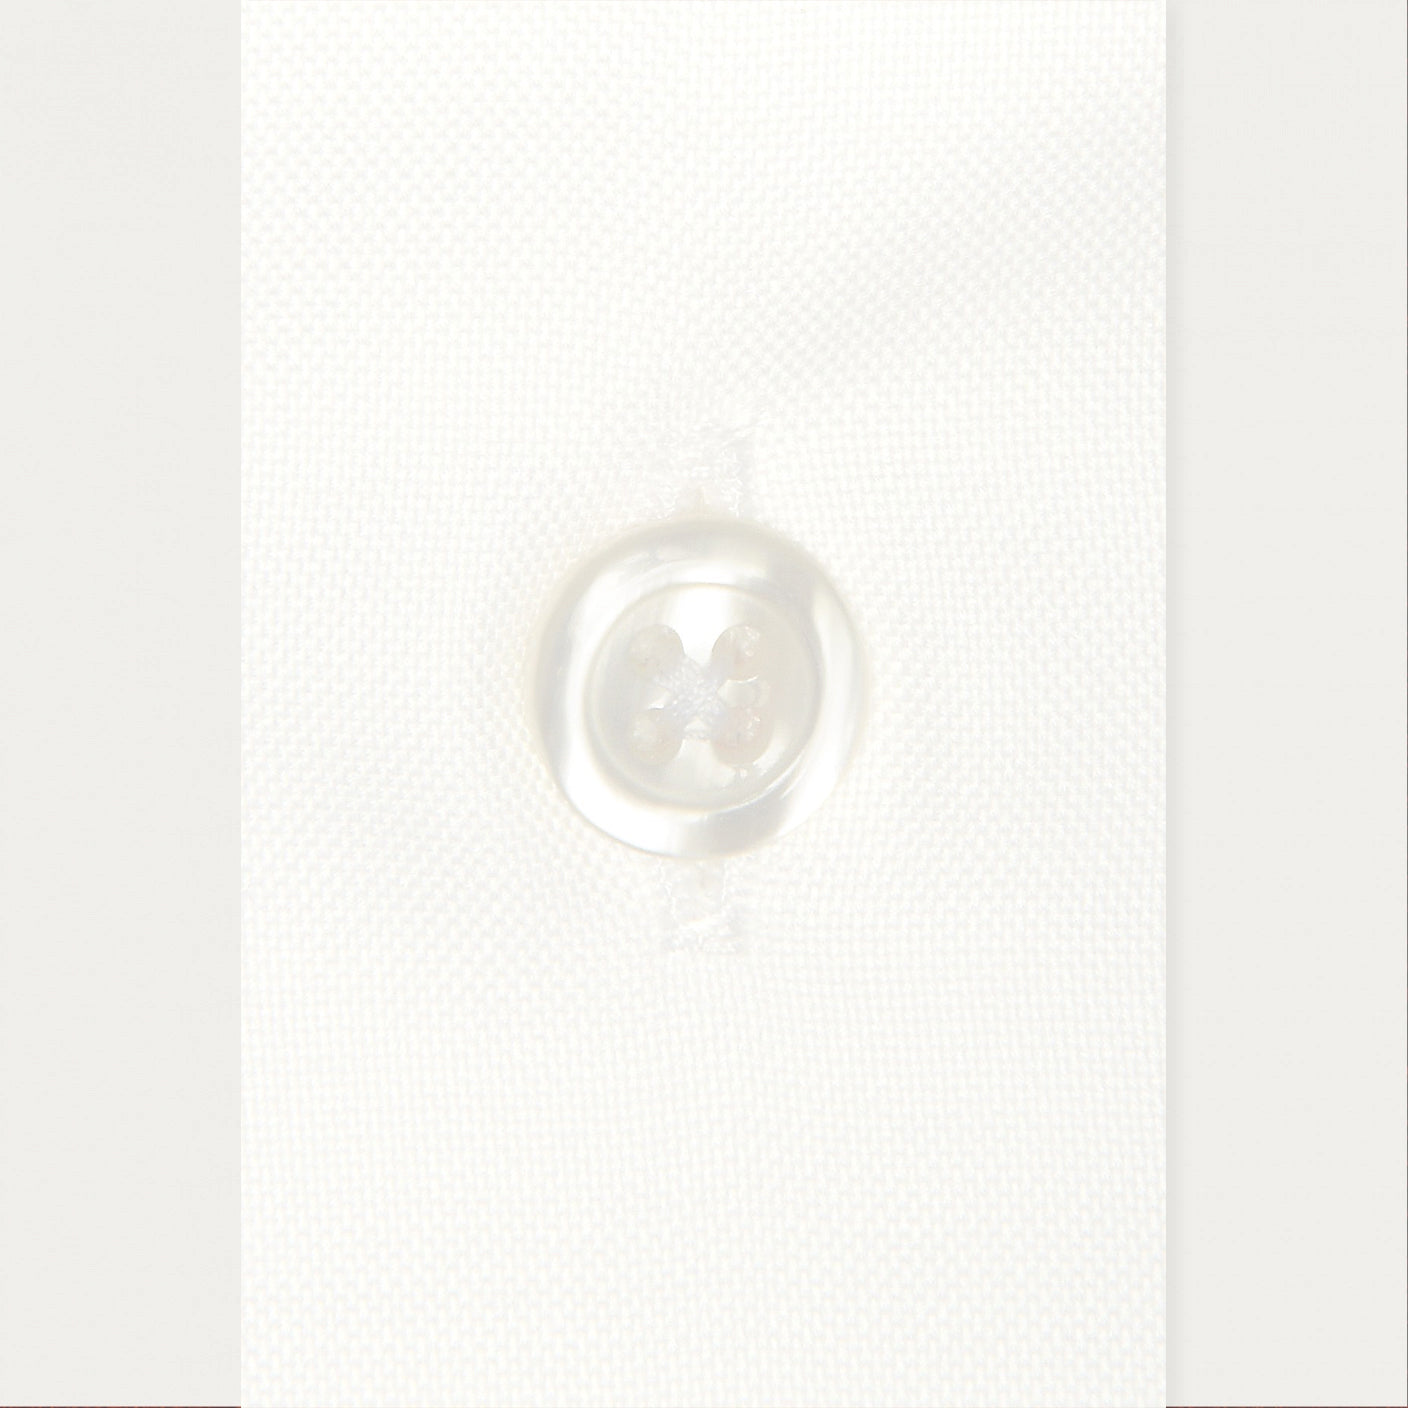 White double-twisted Oxford shirt with French cuffs